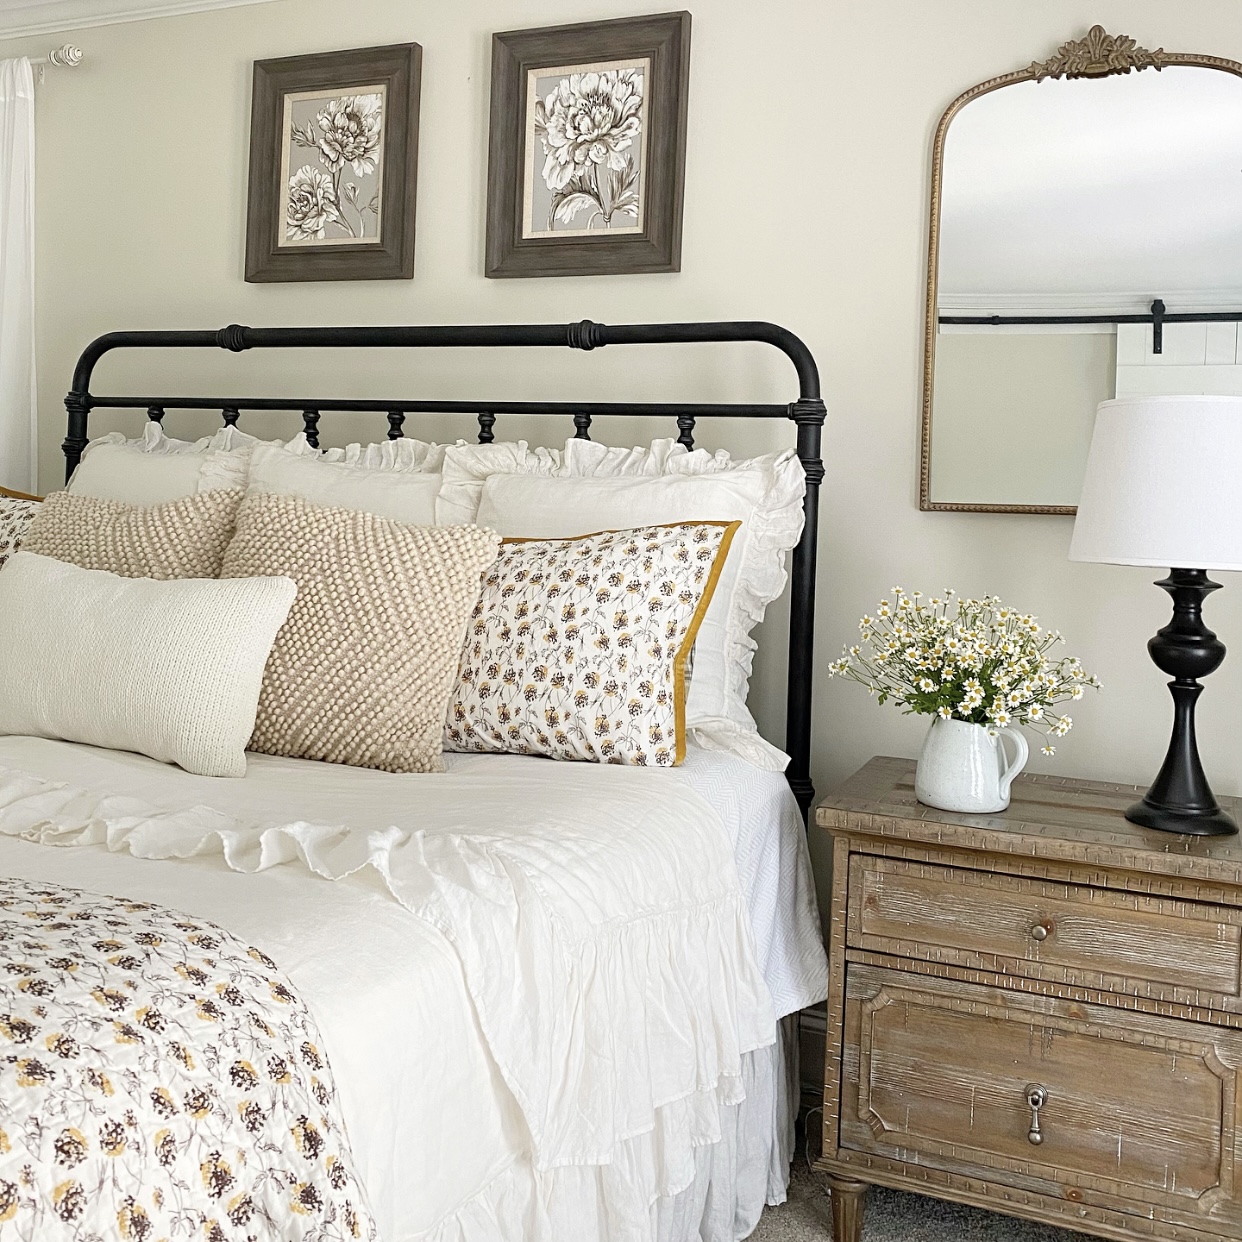 Farmhouse bedroom with black iron bed frame, white, yellow, and brown floral bedding and lots of pillows.